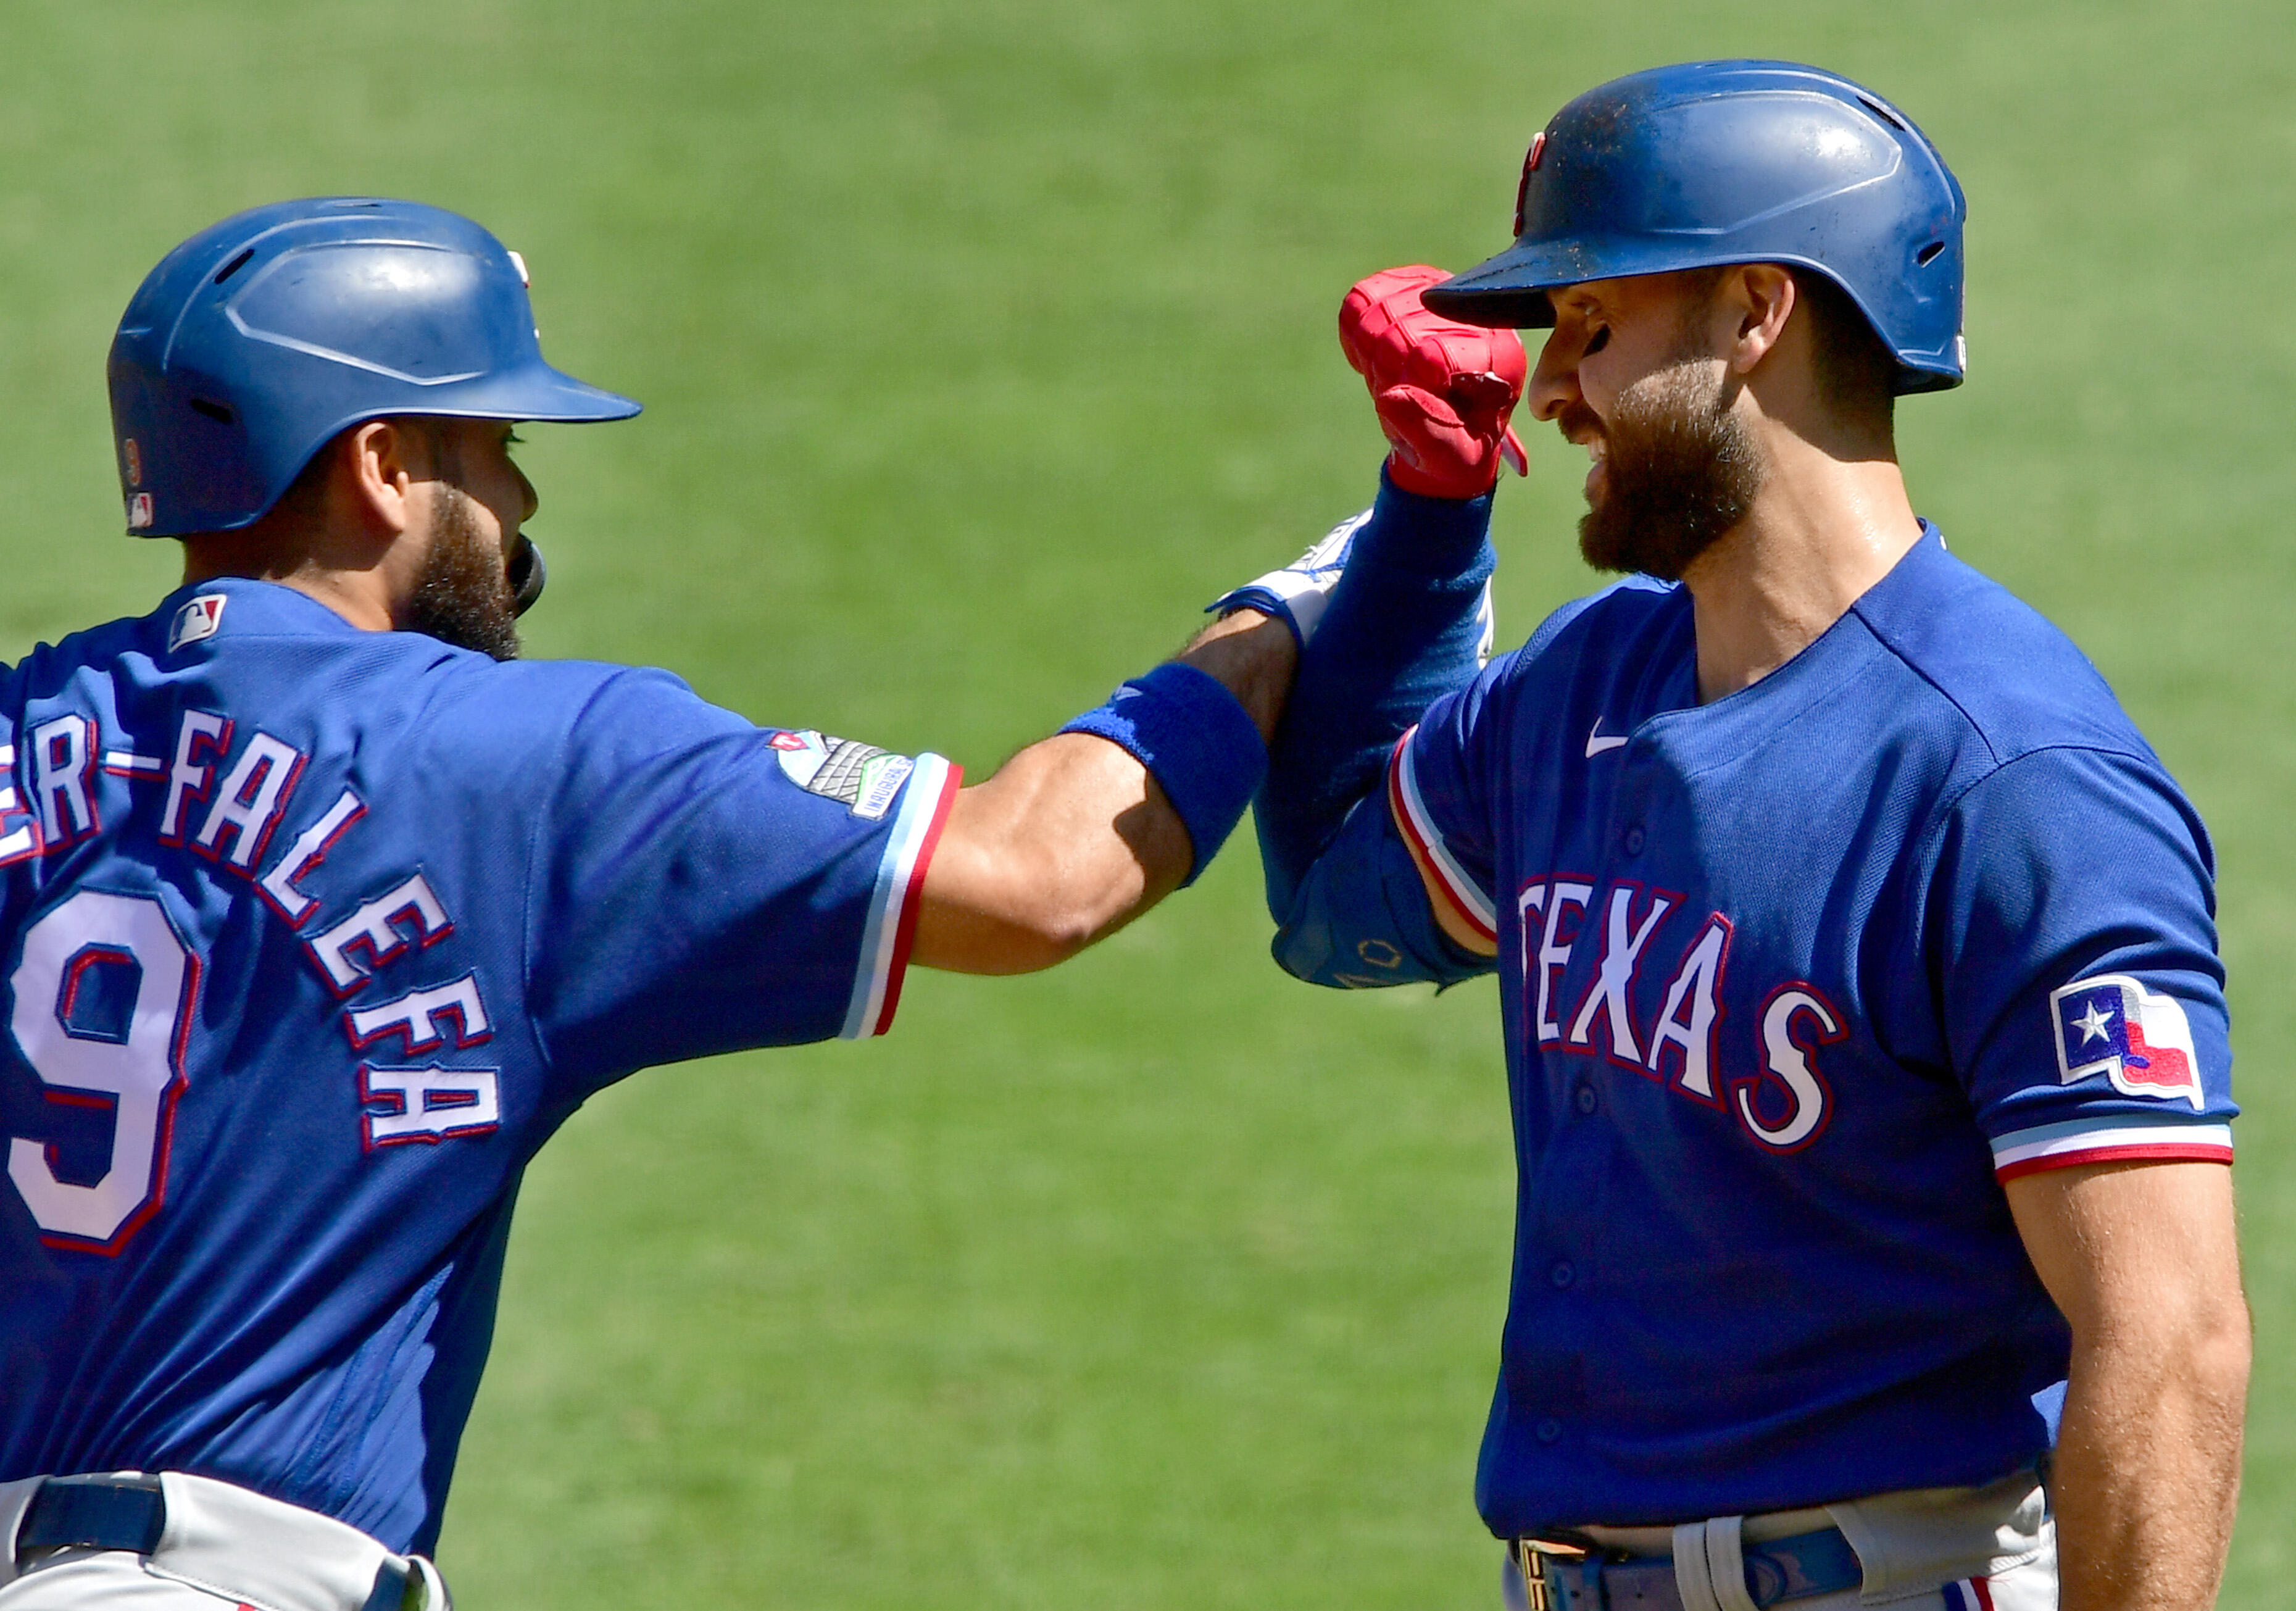 Rangers Agree To Terms With Joey Gallo & Isiah Kiner-Falefa